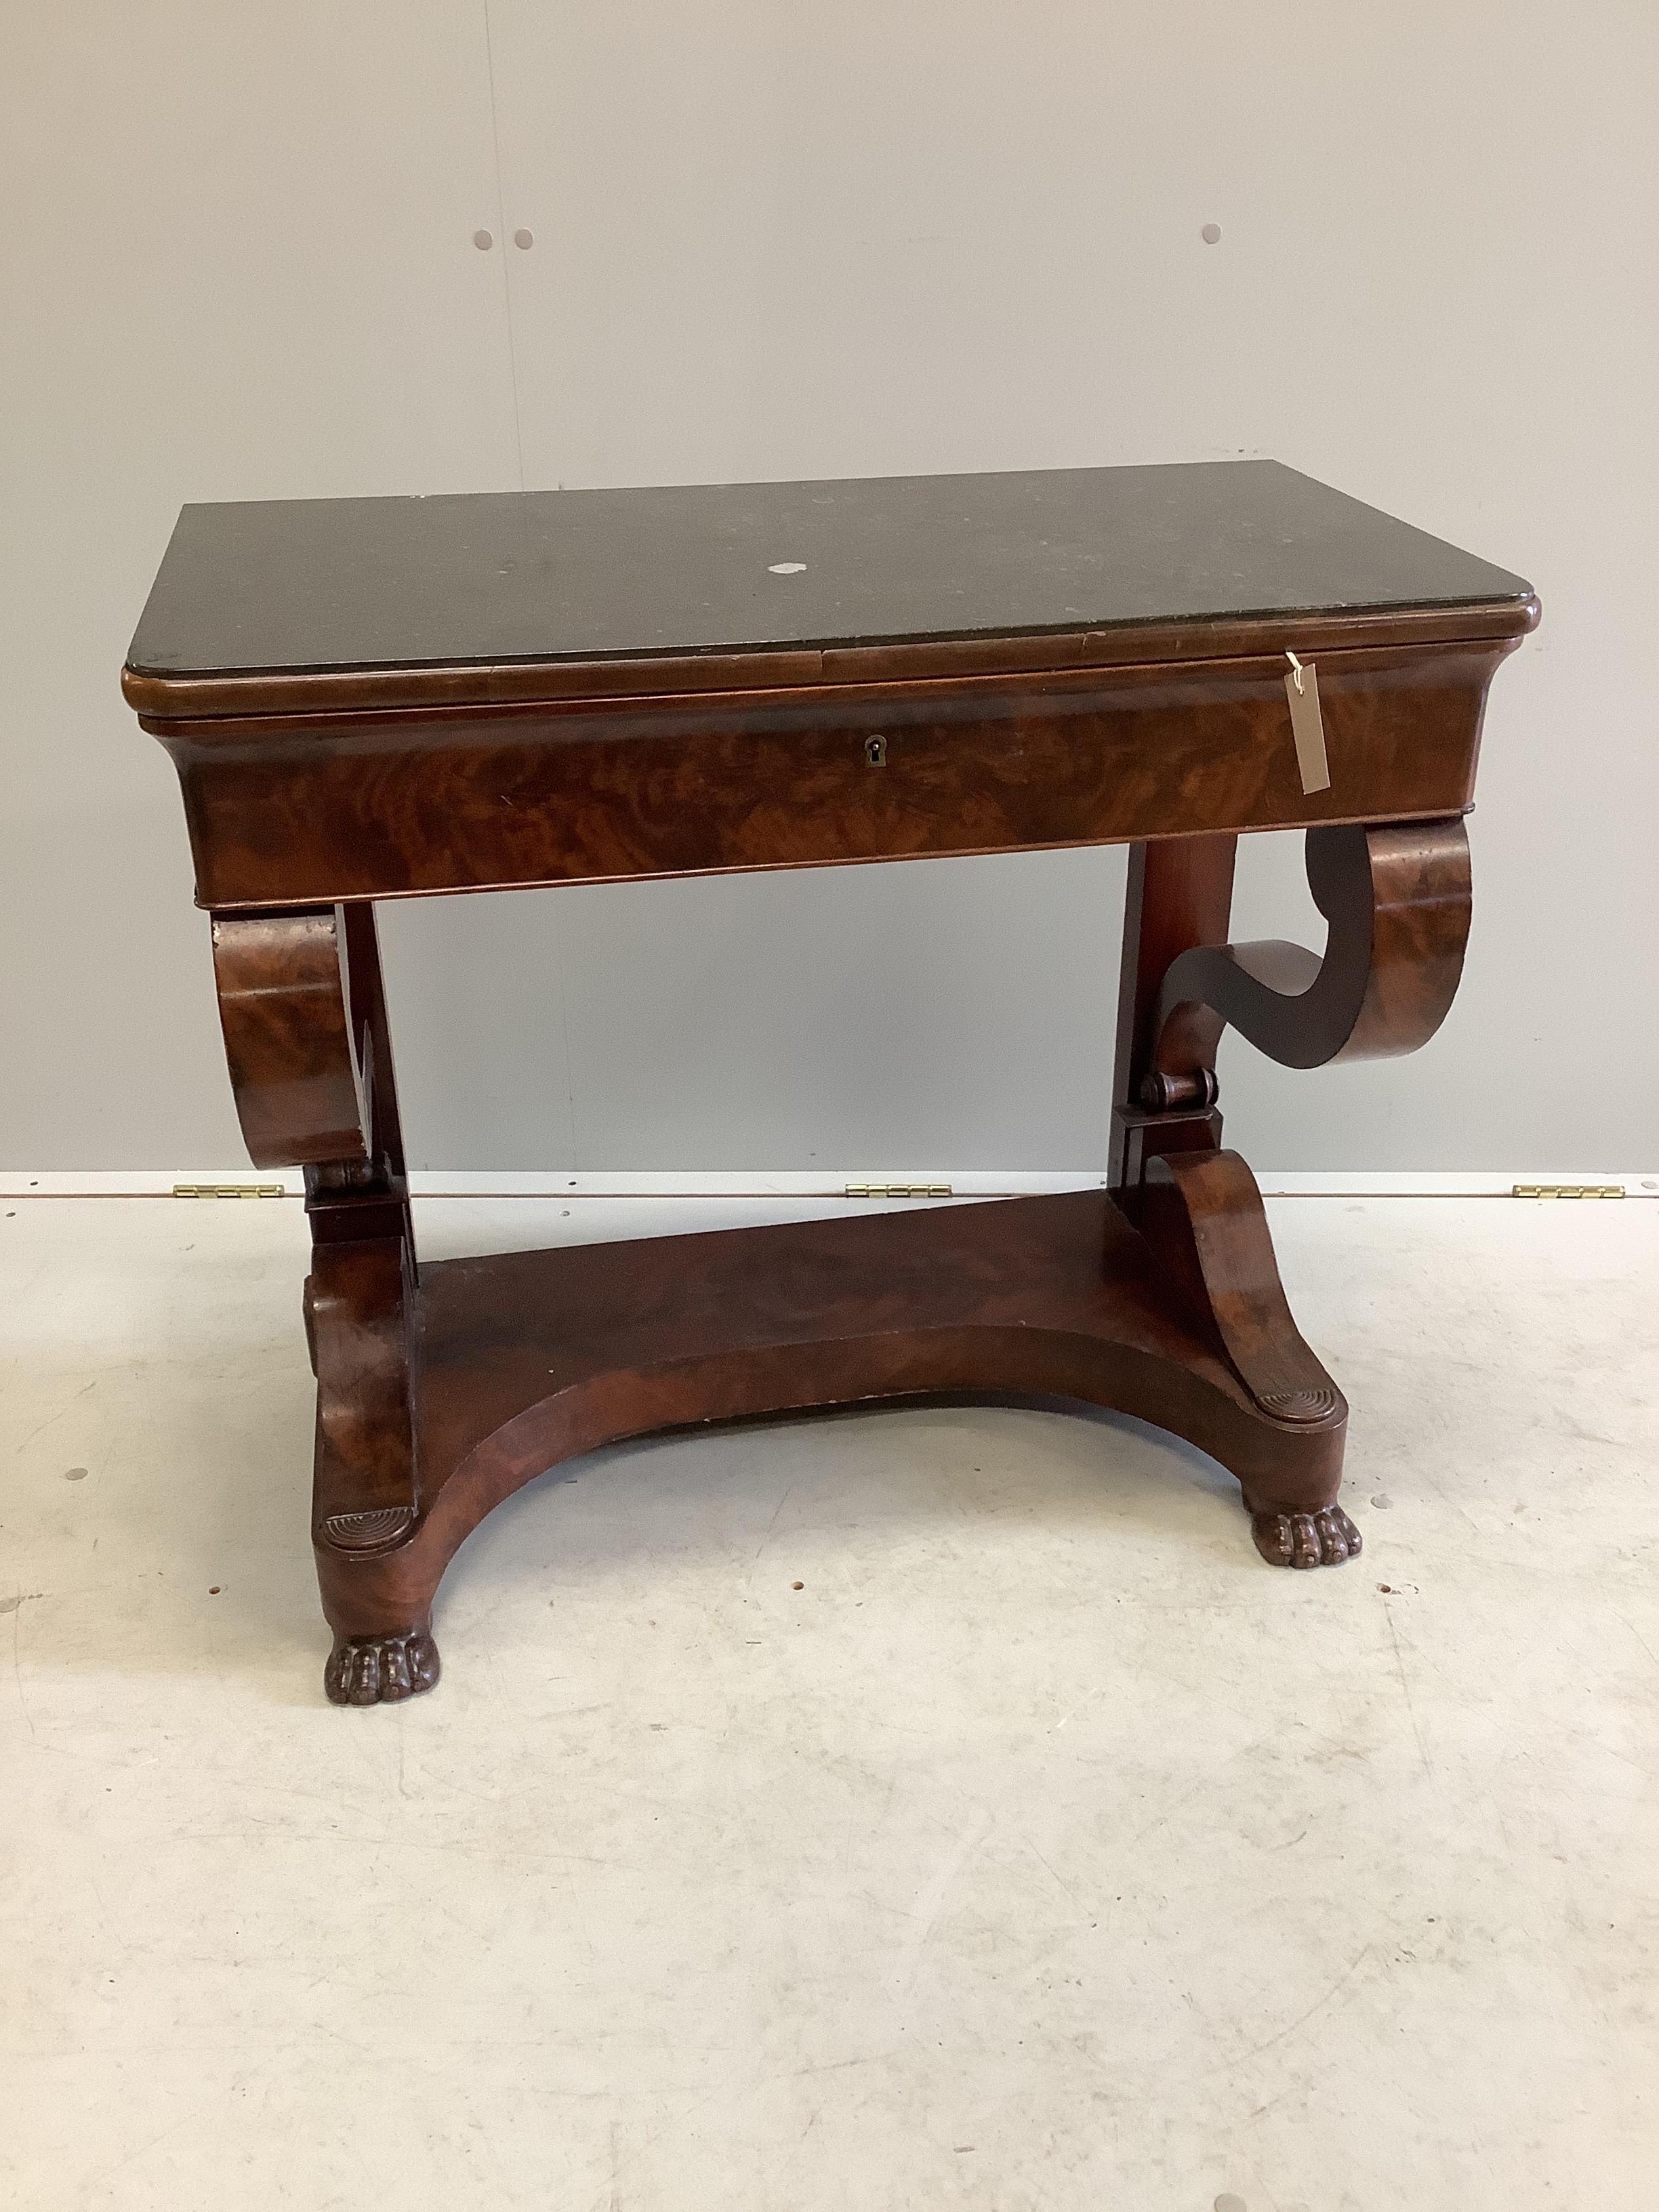 A 19th century French mahogany marble top console table with fitted writing drawer, width 81cm, depth 42cm, height 74cm